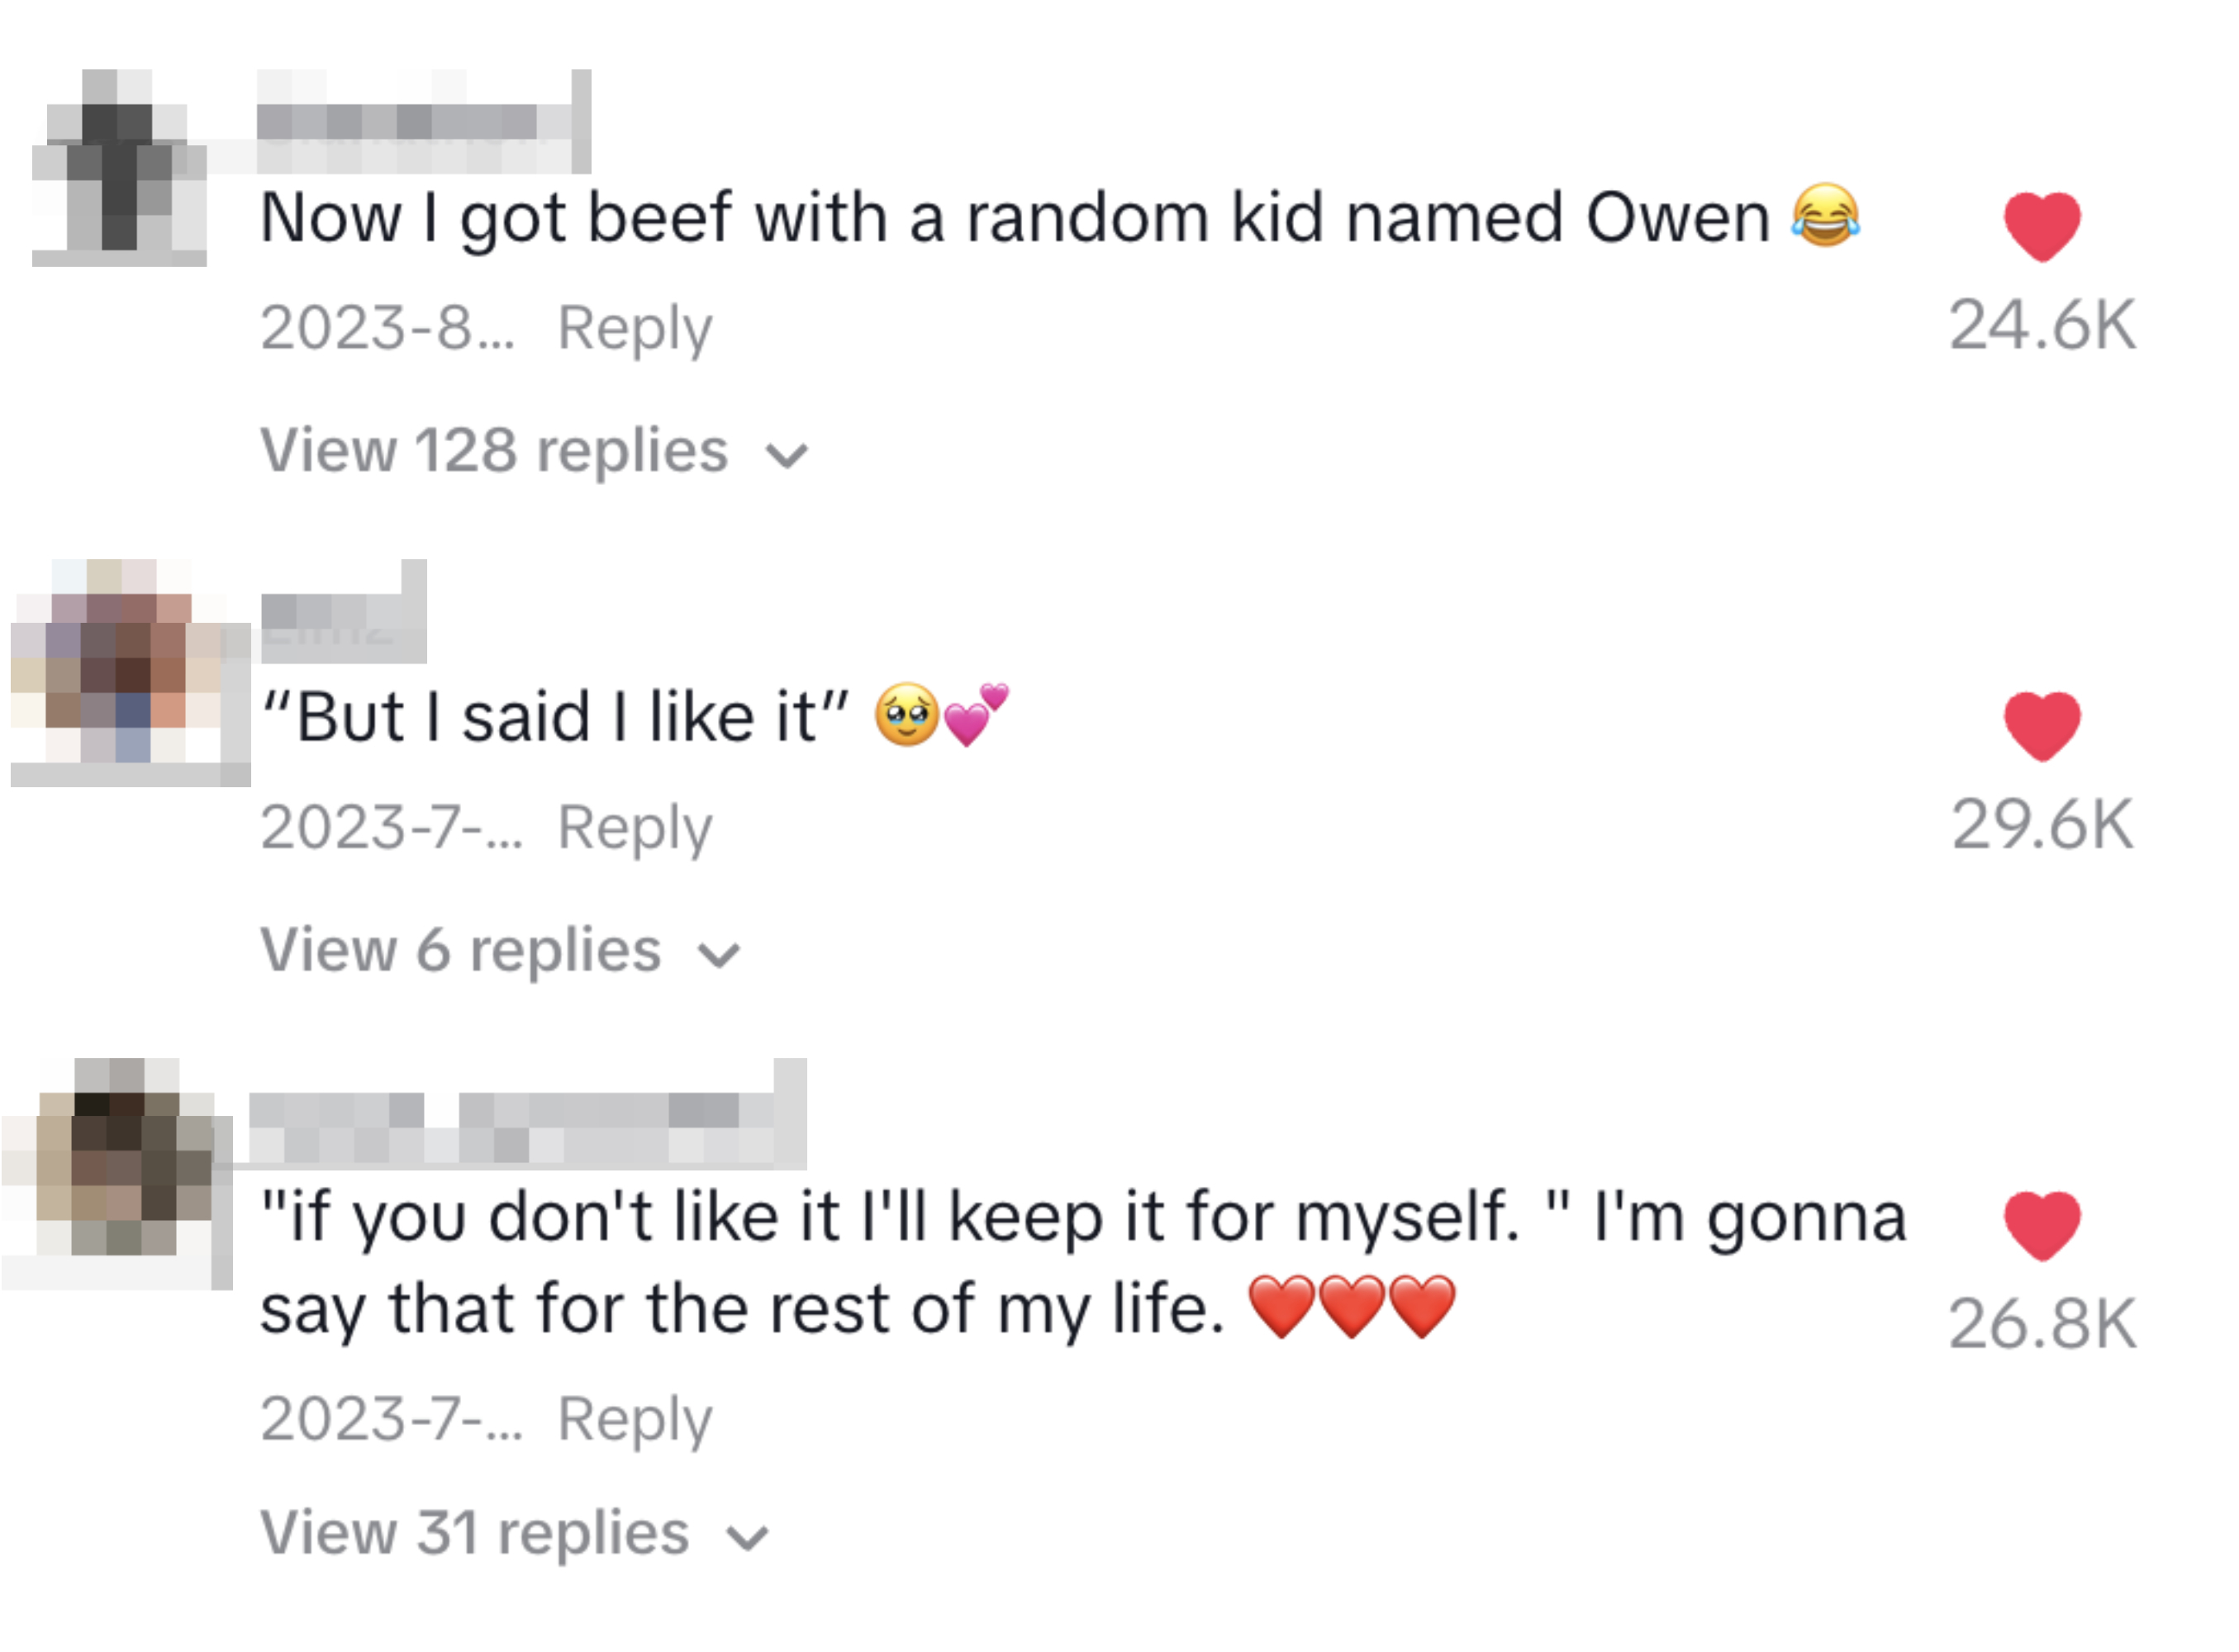 &quot;Now I got beef with a random kid named Owen&quot;